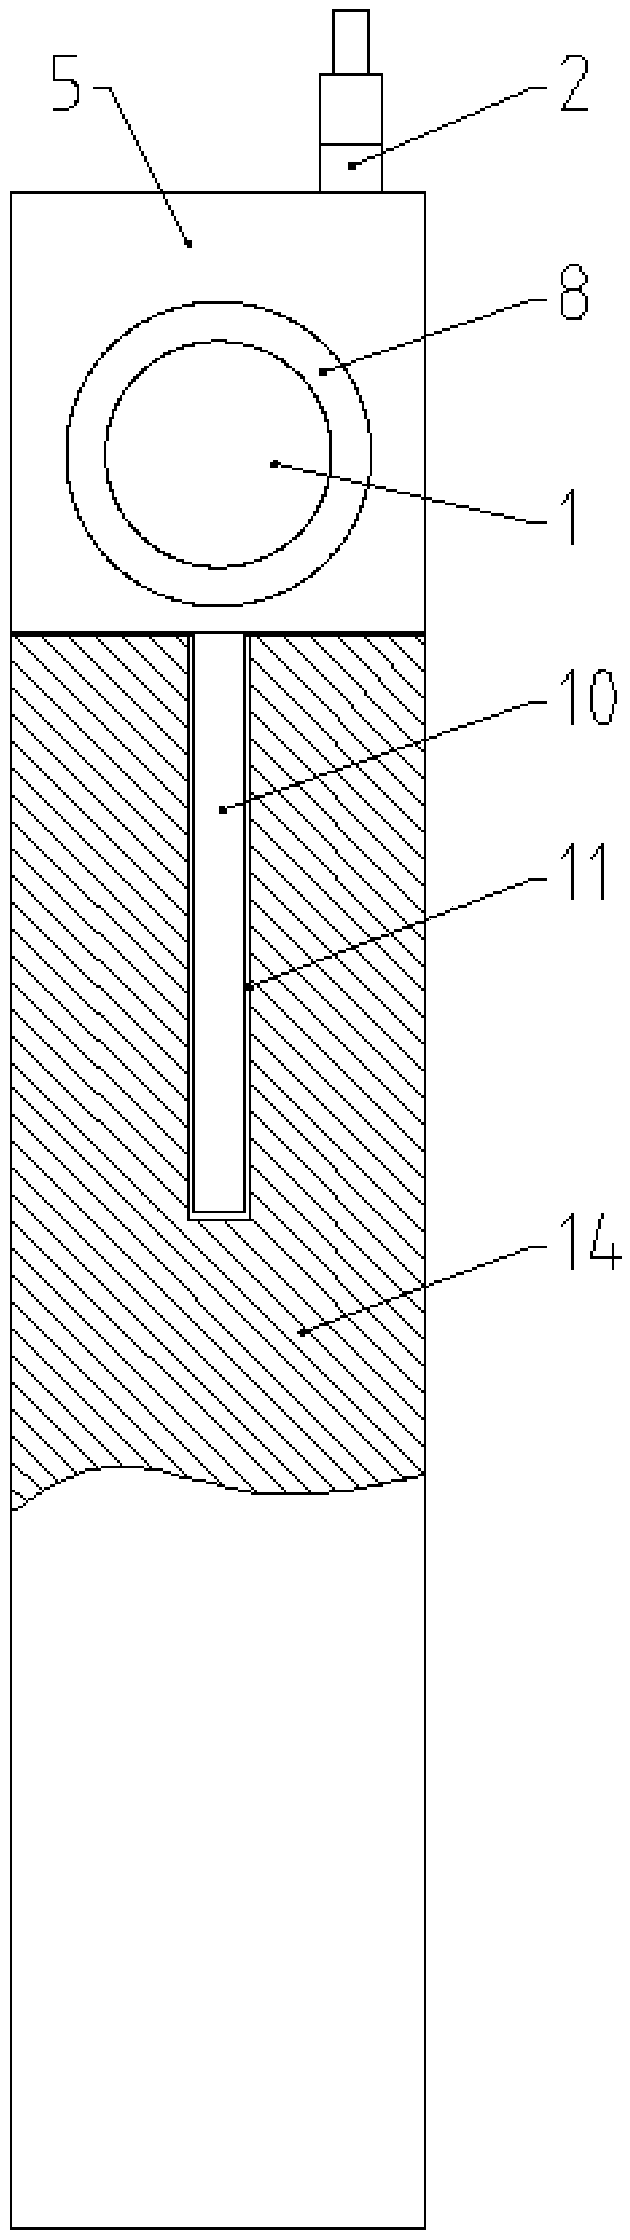 A movable hard disk having am accommodated data line